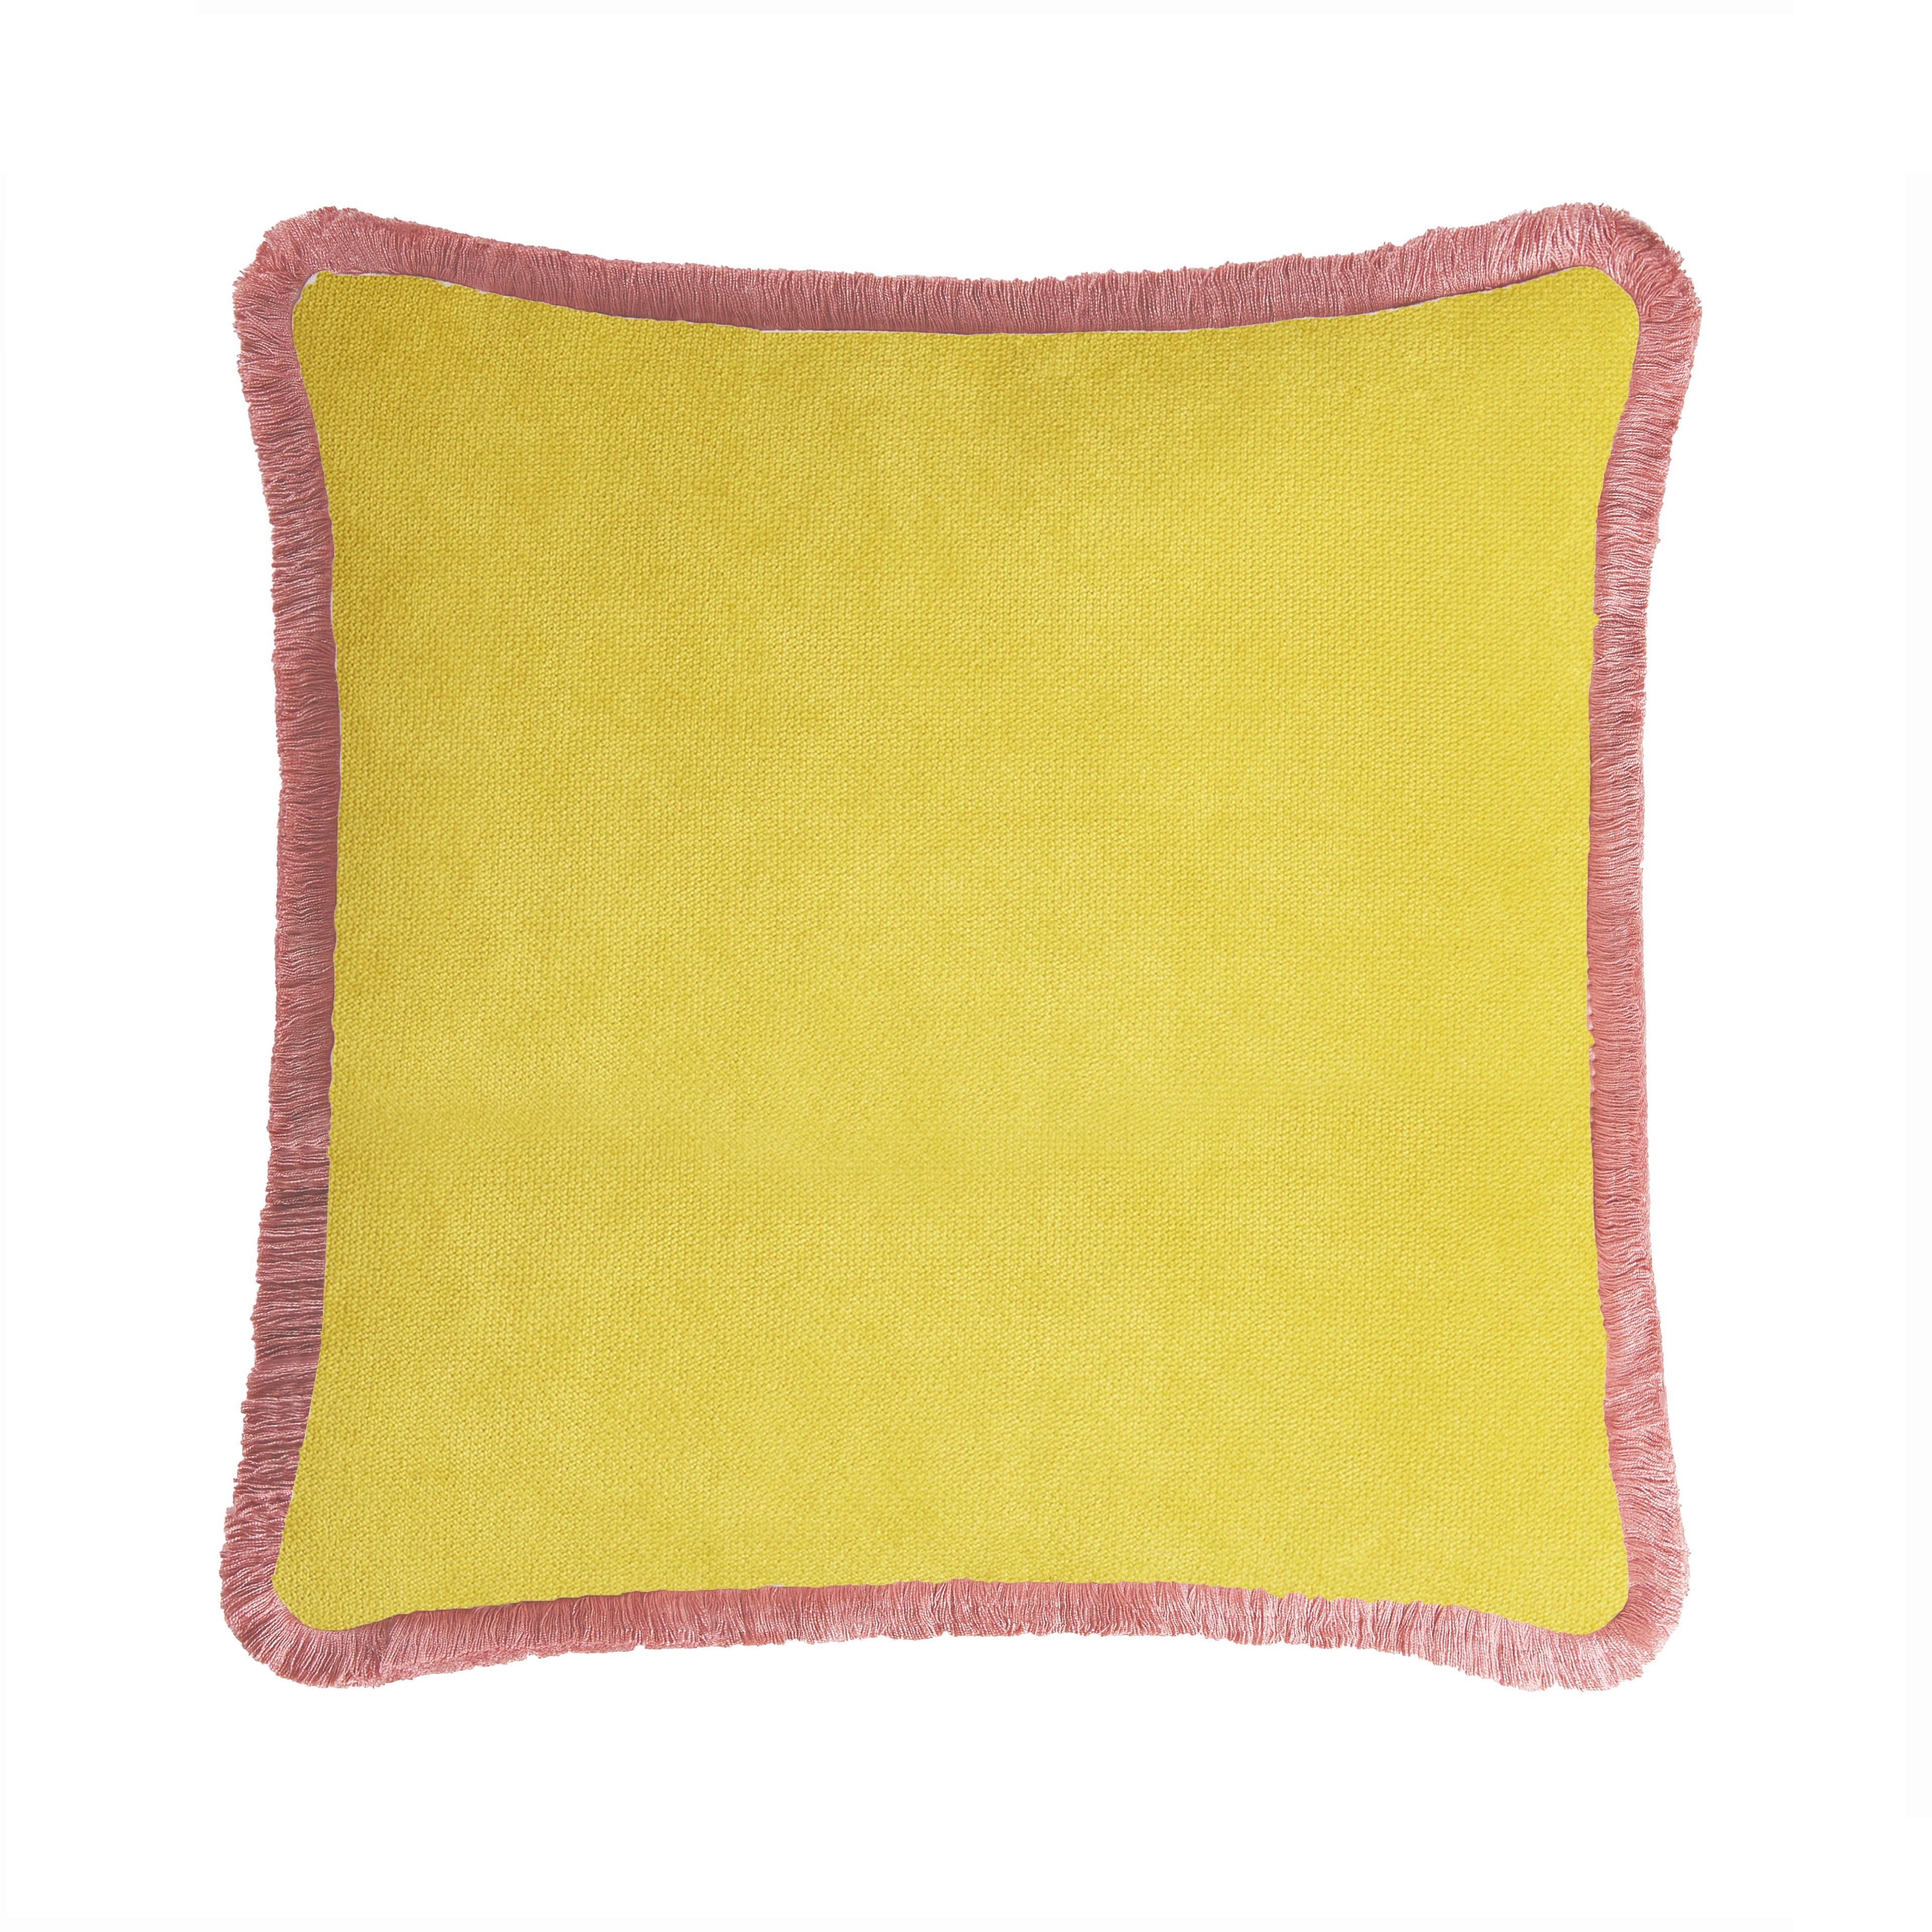 Lo Decor Velvet Yellow Pillow with Pink Fringes